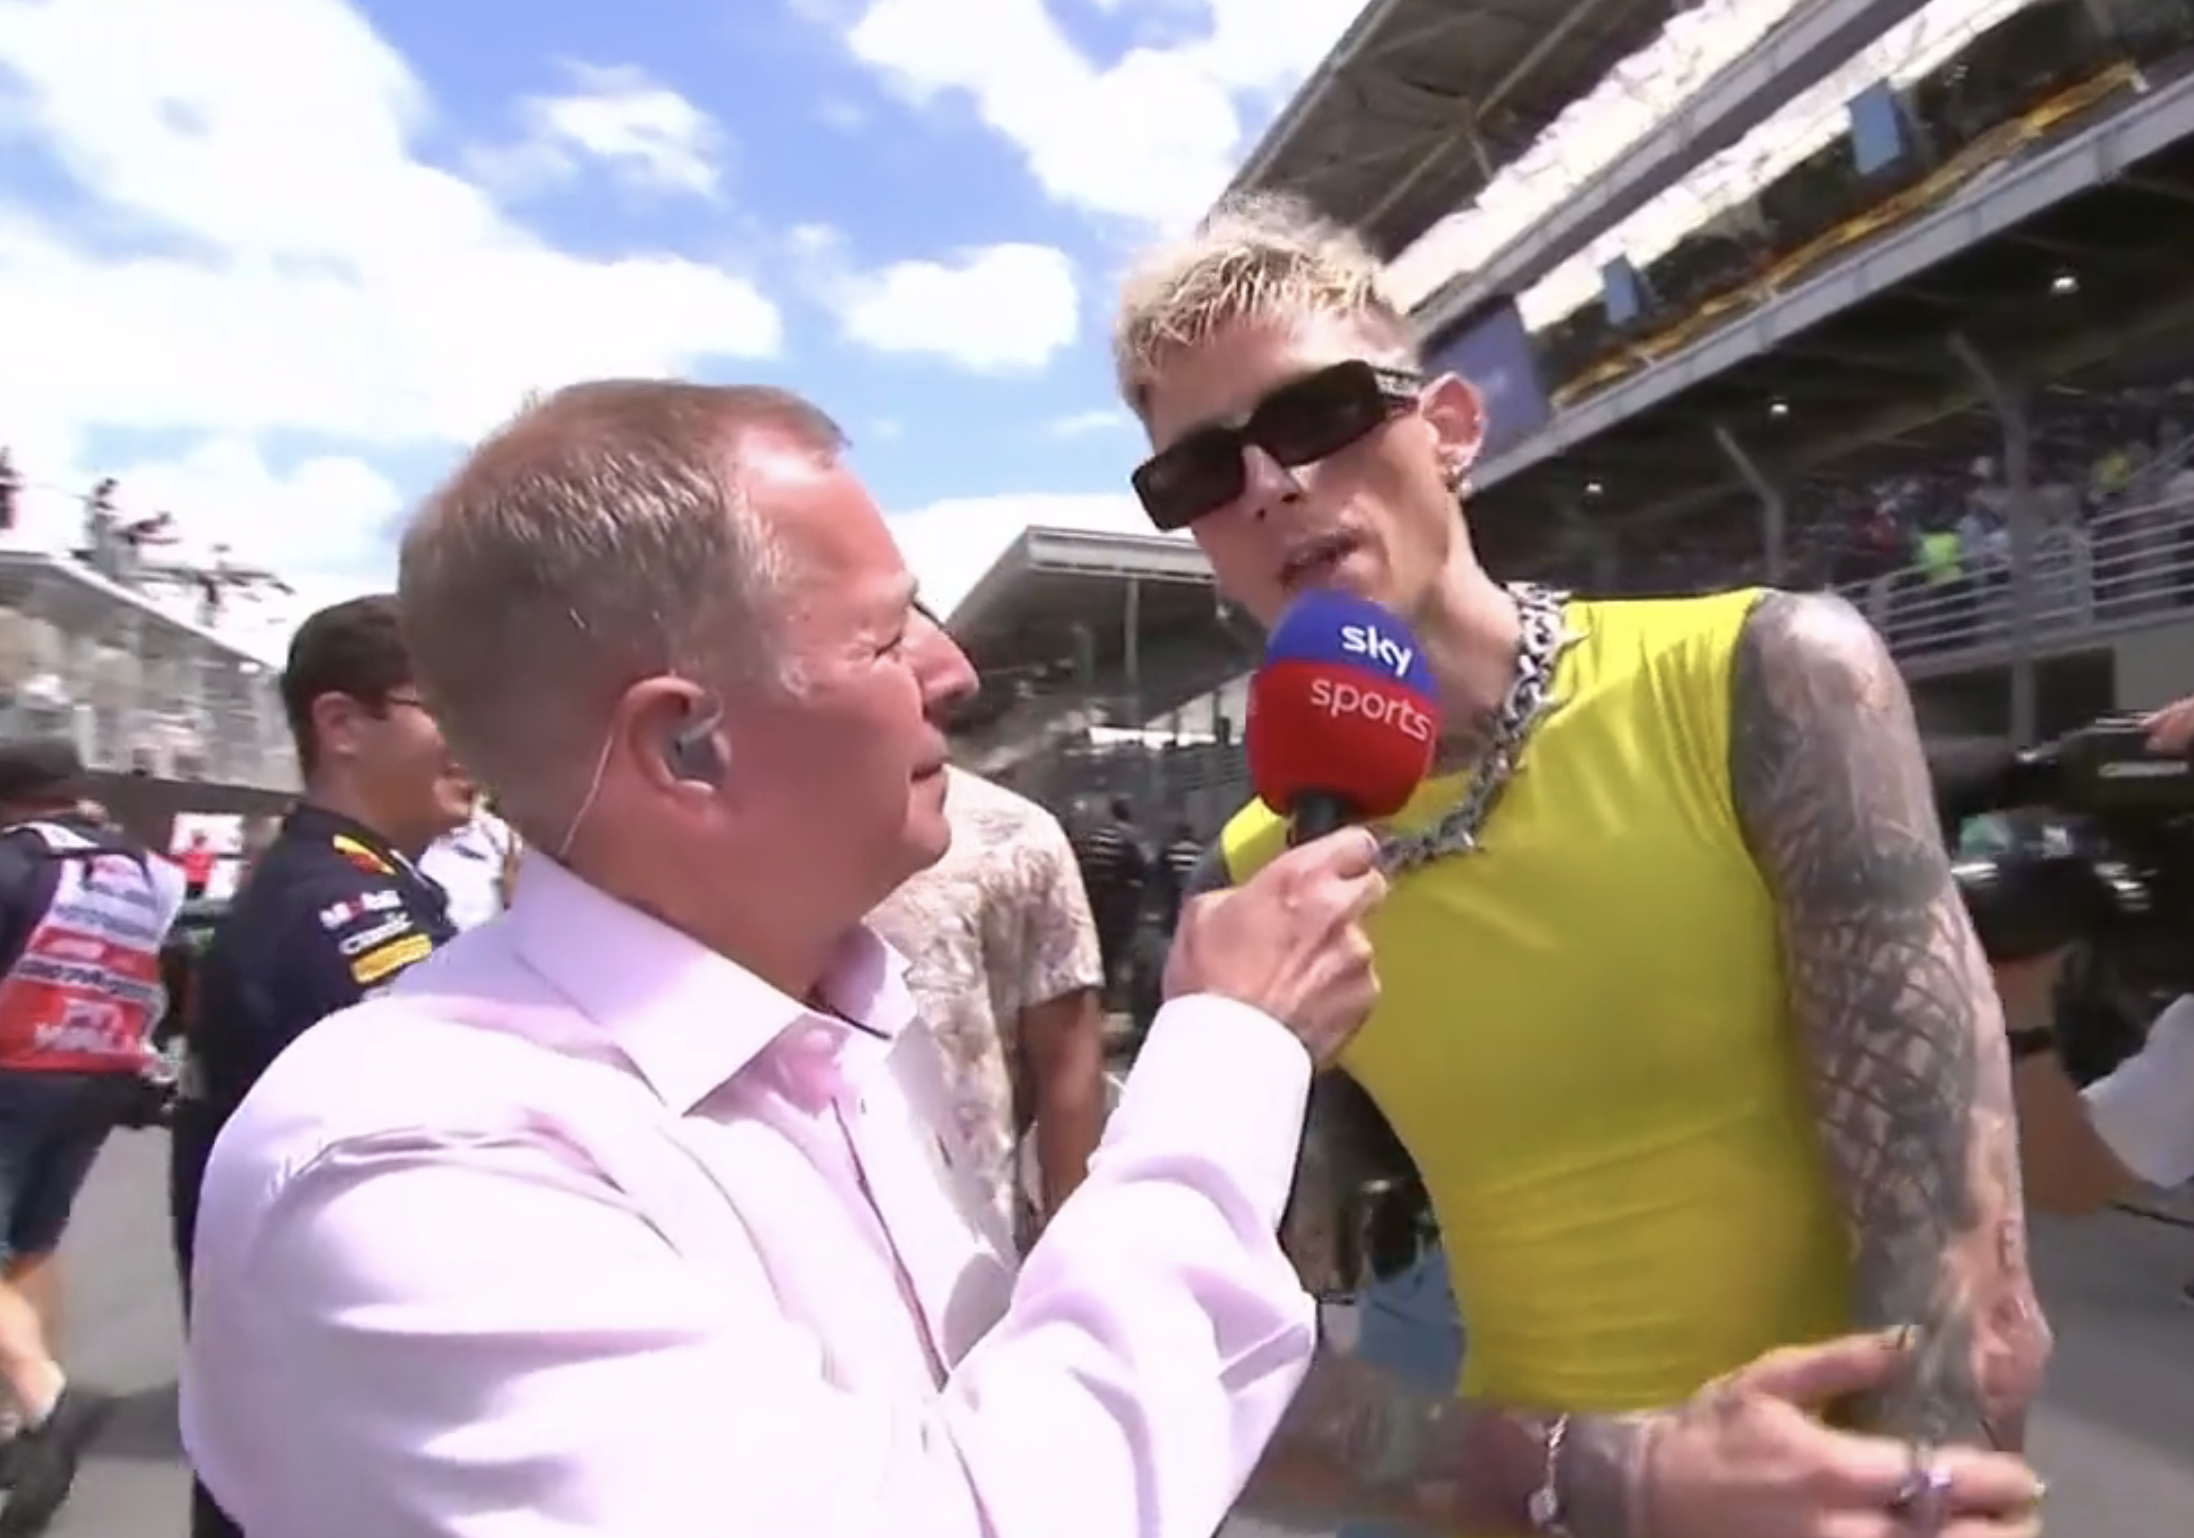 MGK and Martin in an interview